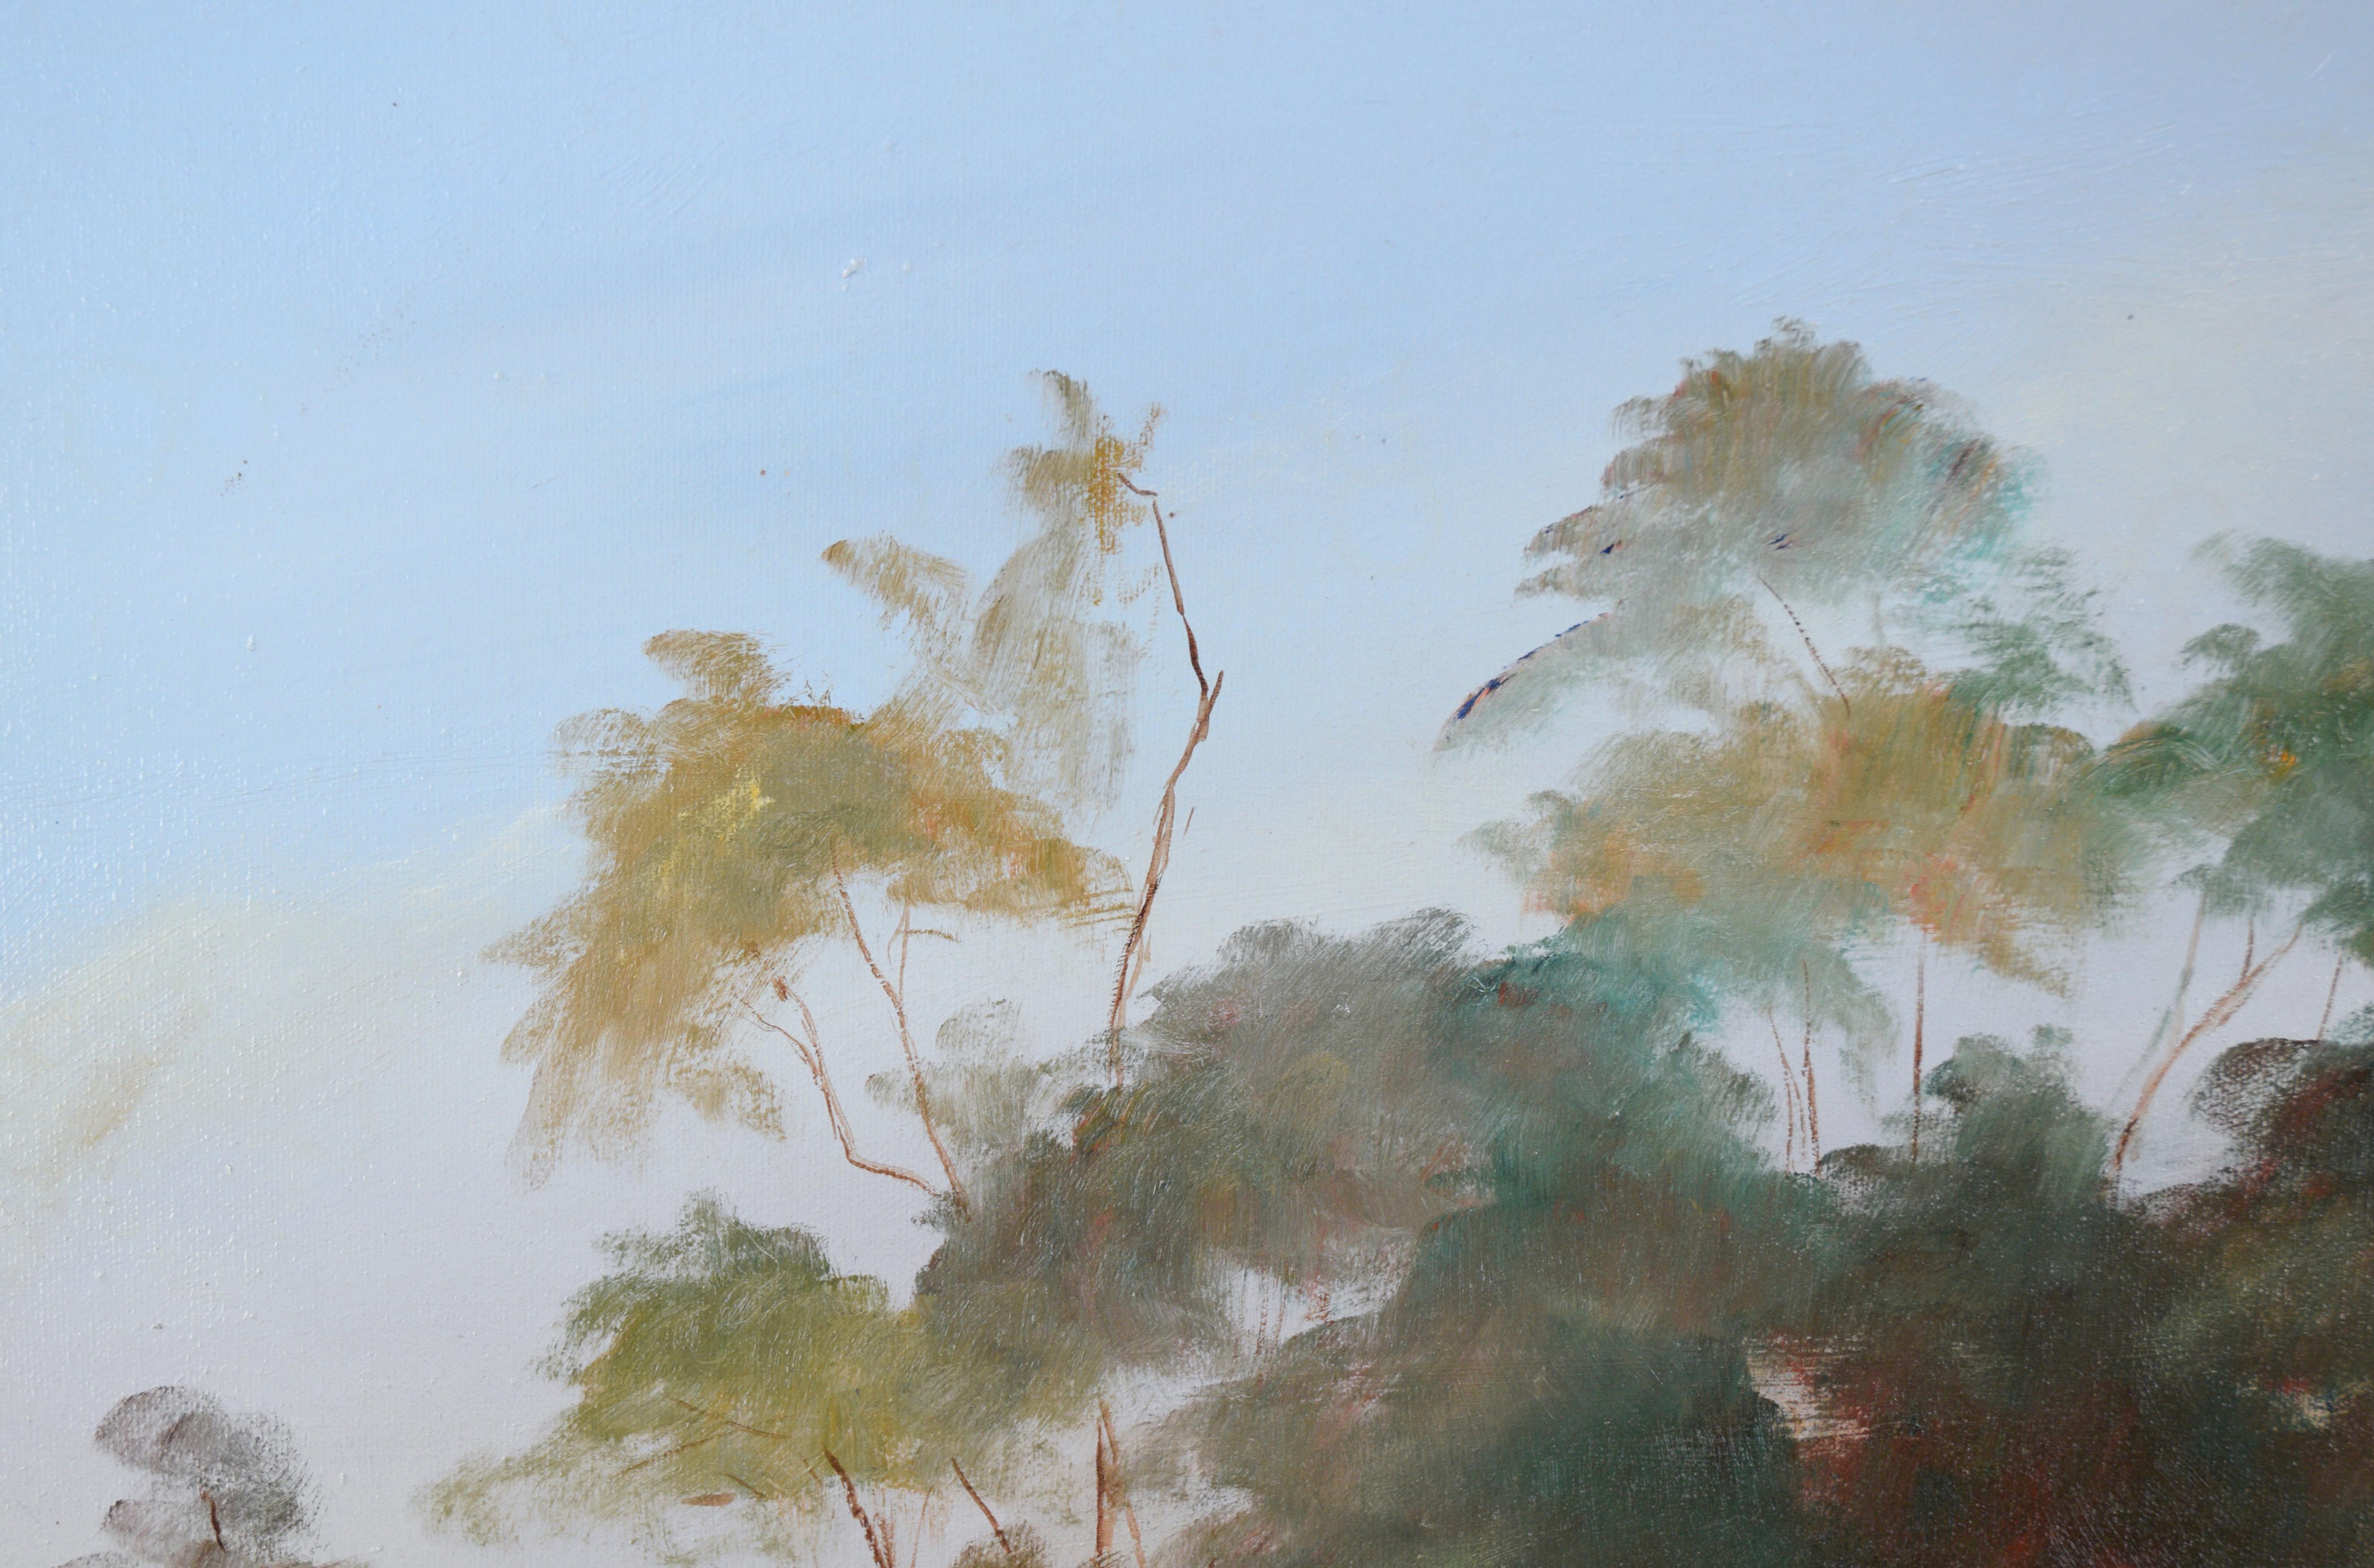 Trees at the Top of the Hill - California Coastal Landscape in Oil on Canvas - Painting by Kenneth Lucas